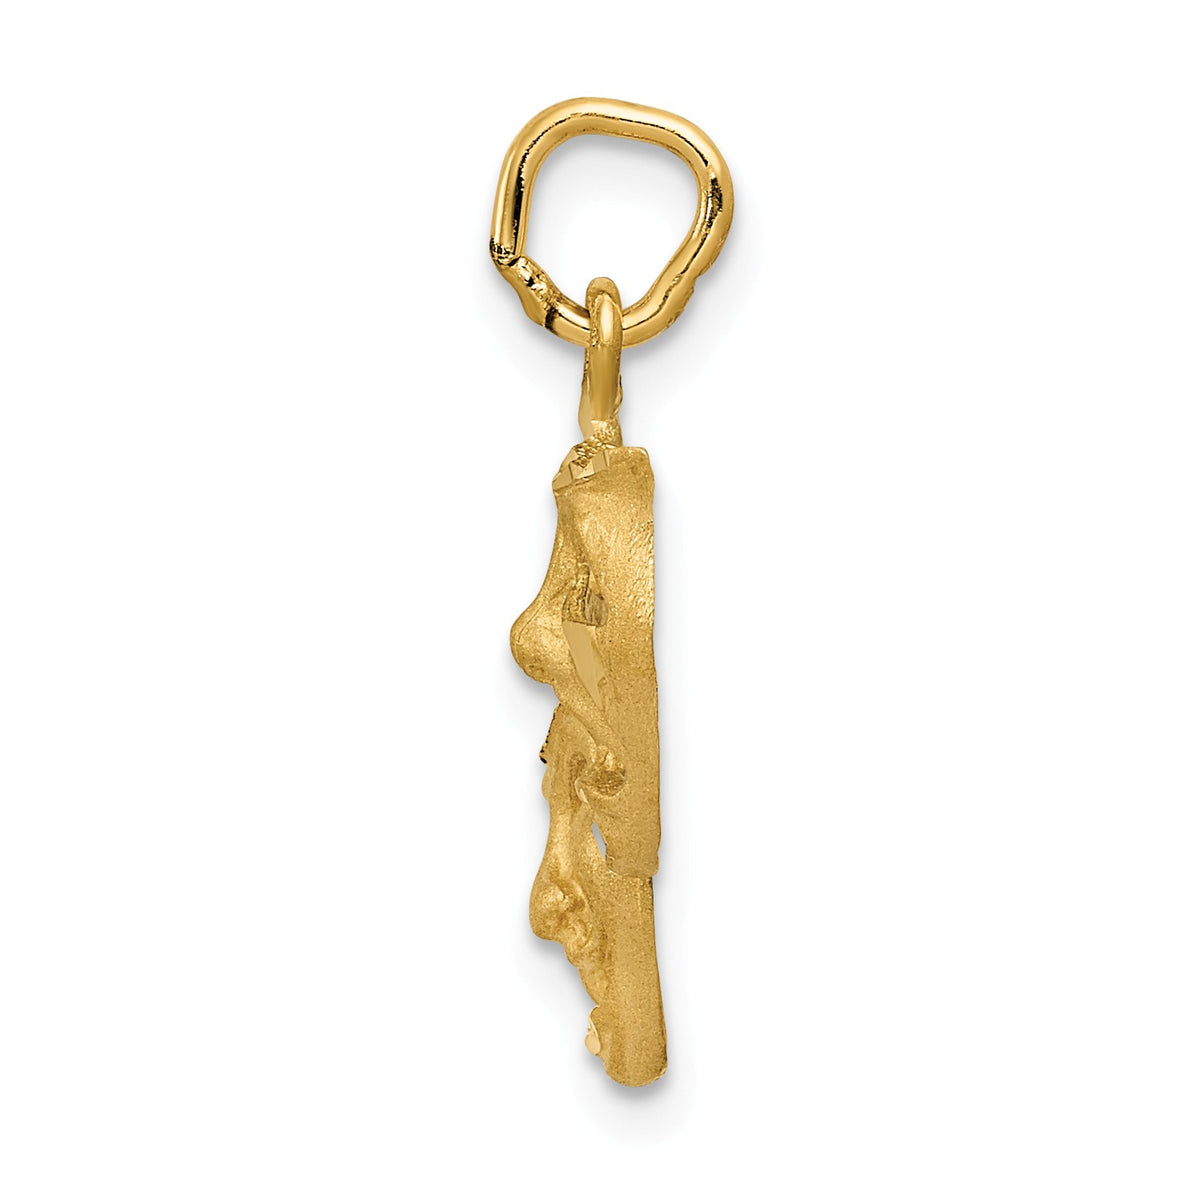 Comedy & Tragedy mask Charm in 14k Yellow Gold